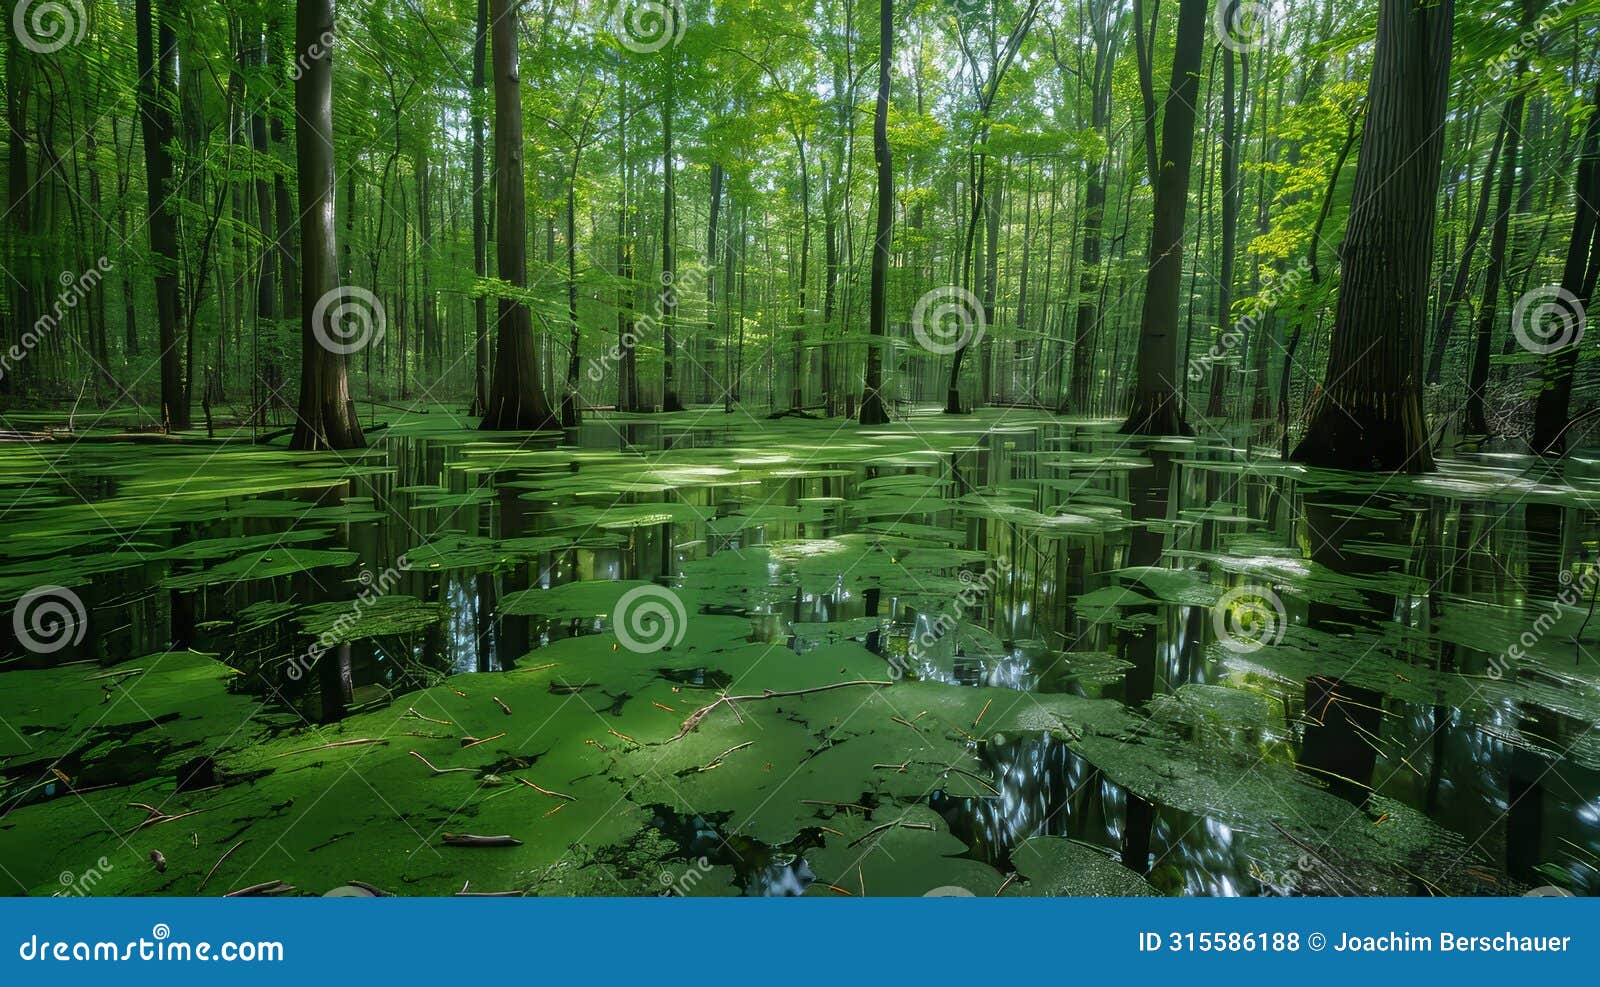 unexplored wilds formidable swampy area nestled deep in the heart of a dense forest